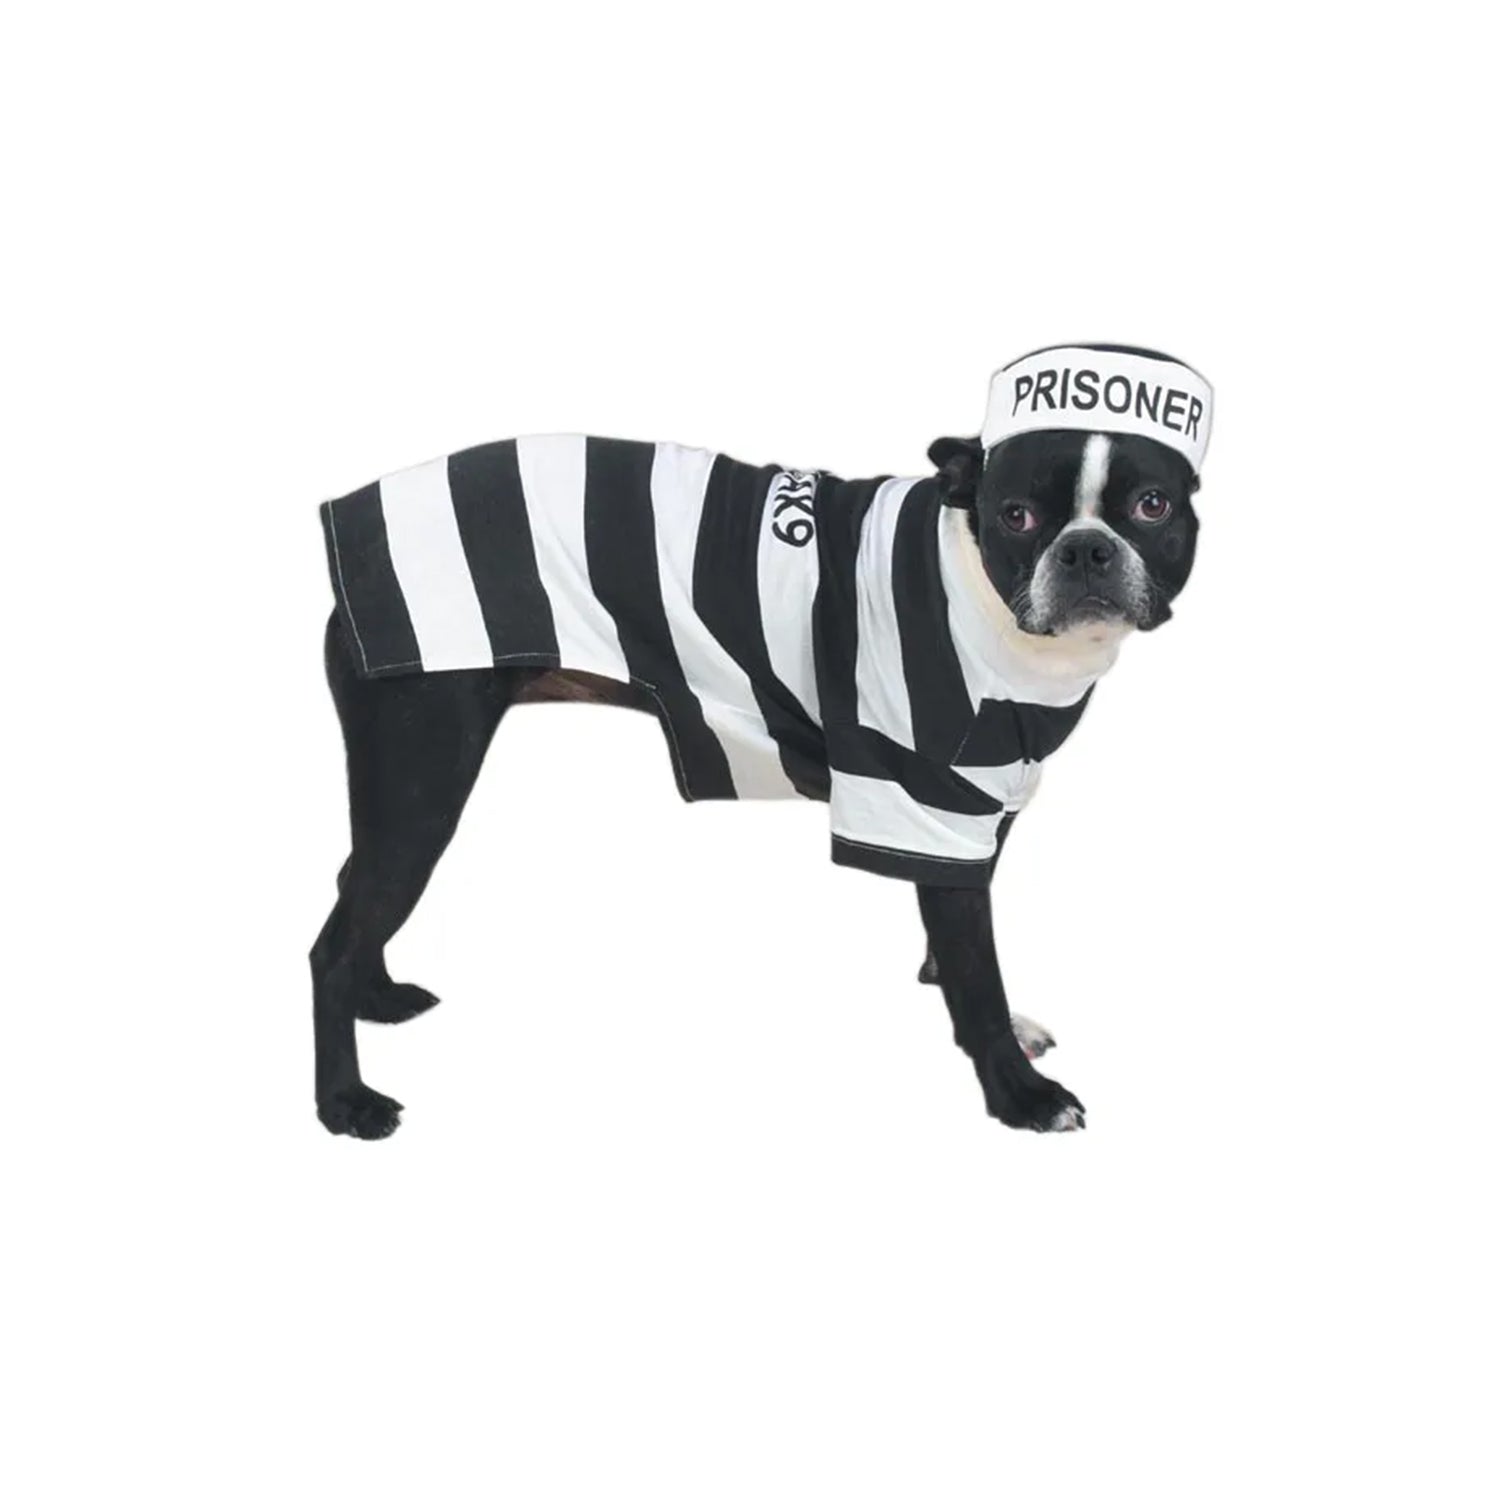 Casual Canine Prison Pooch Costume